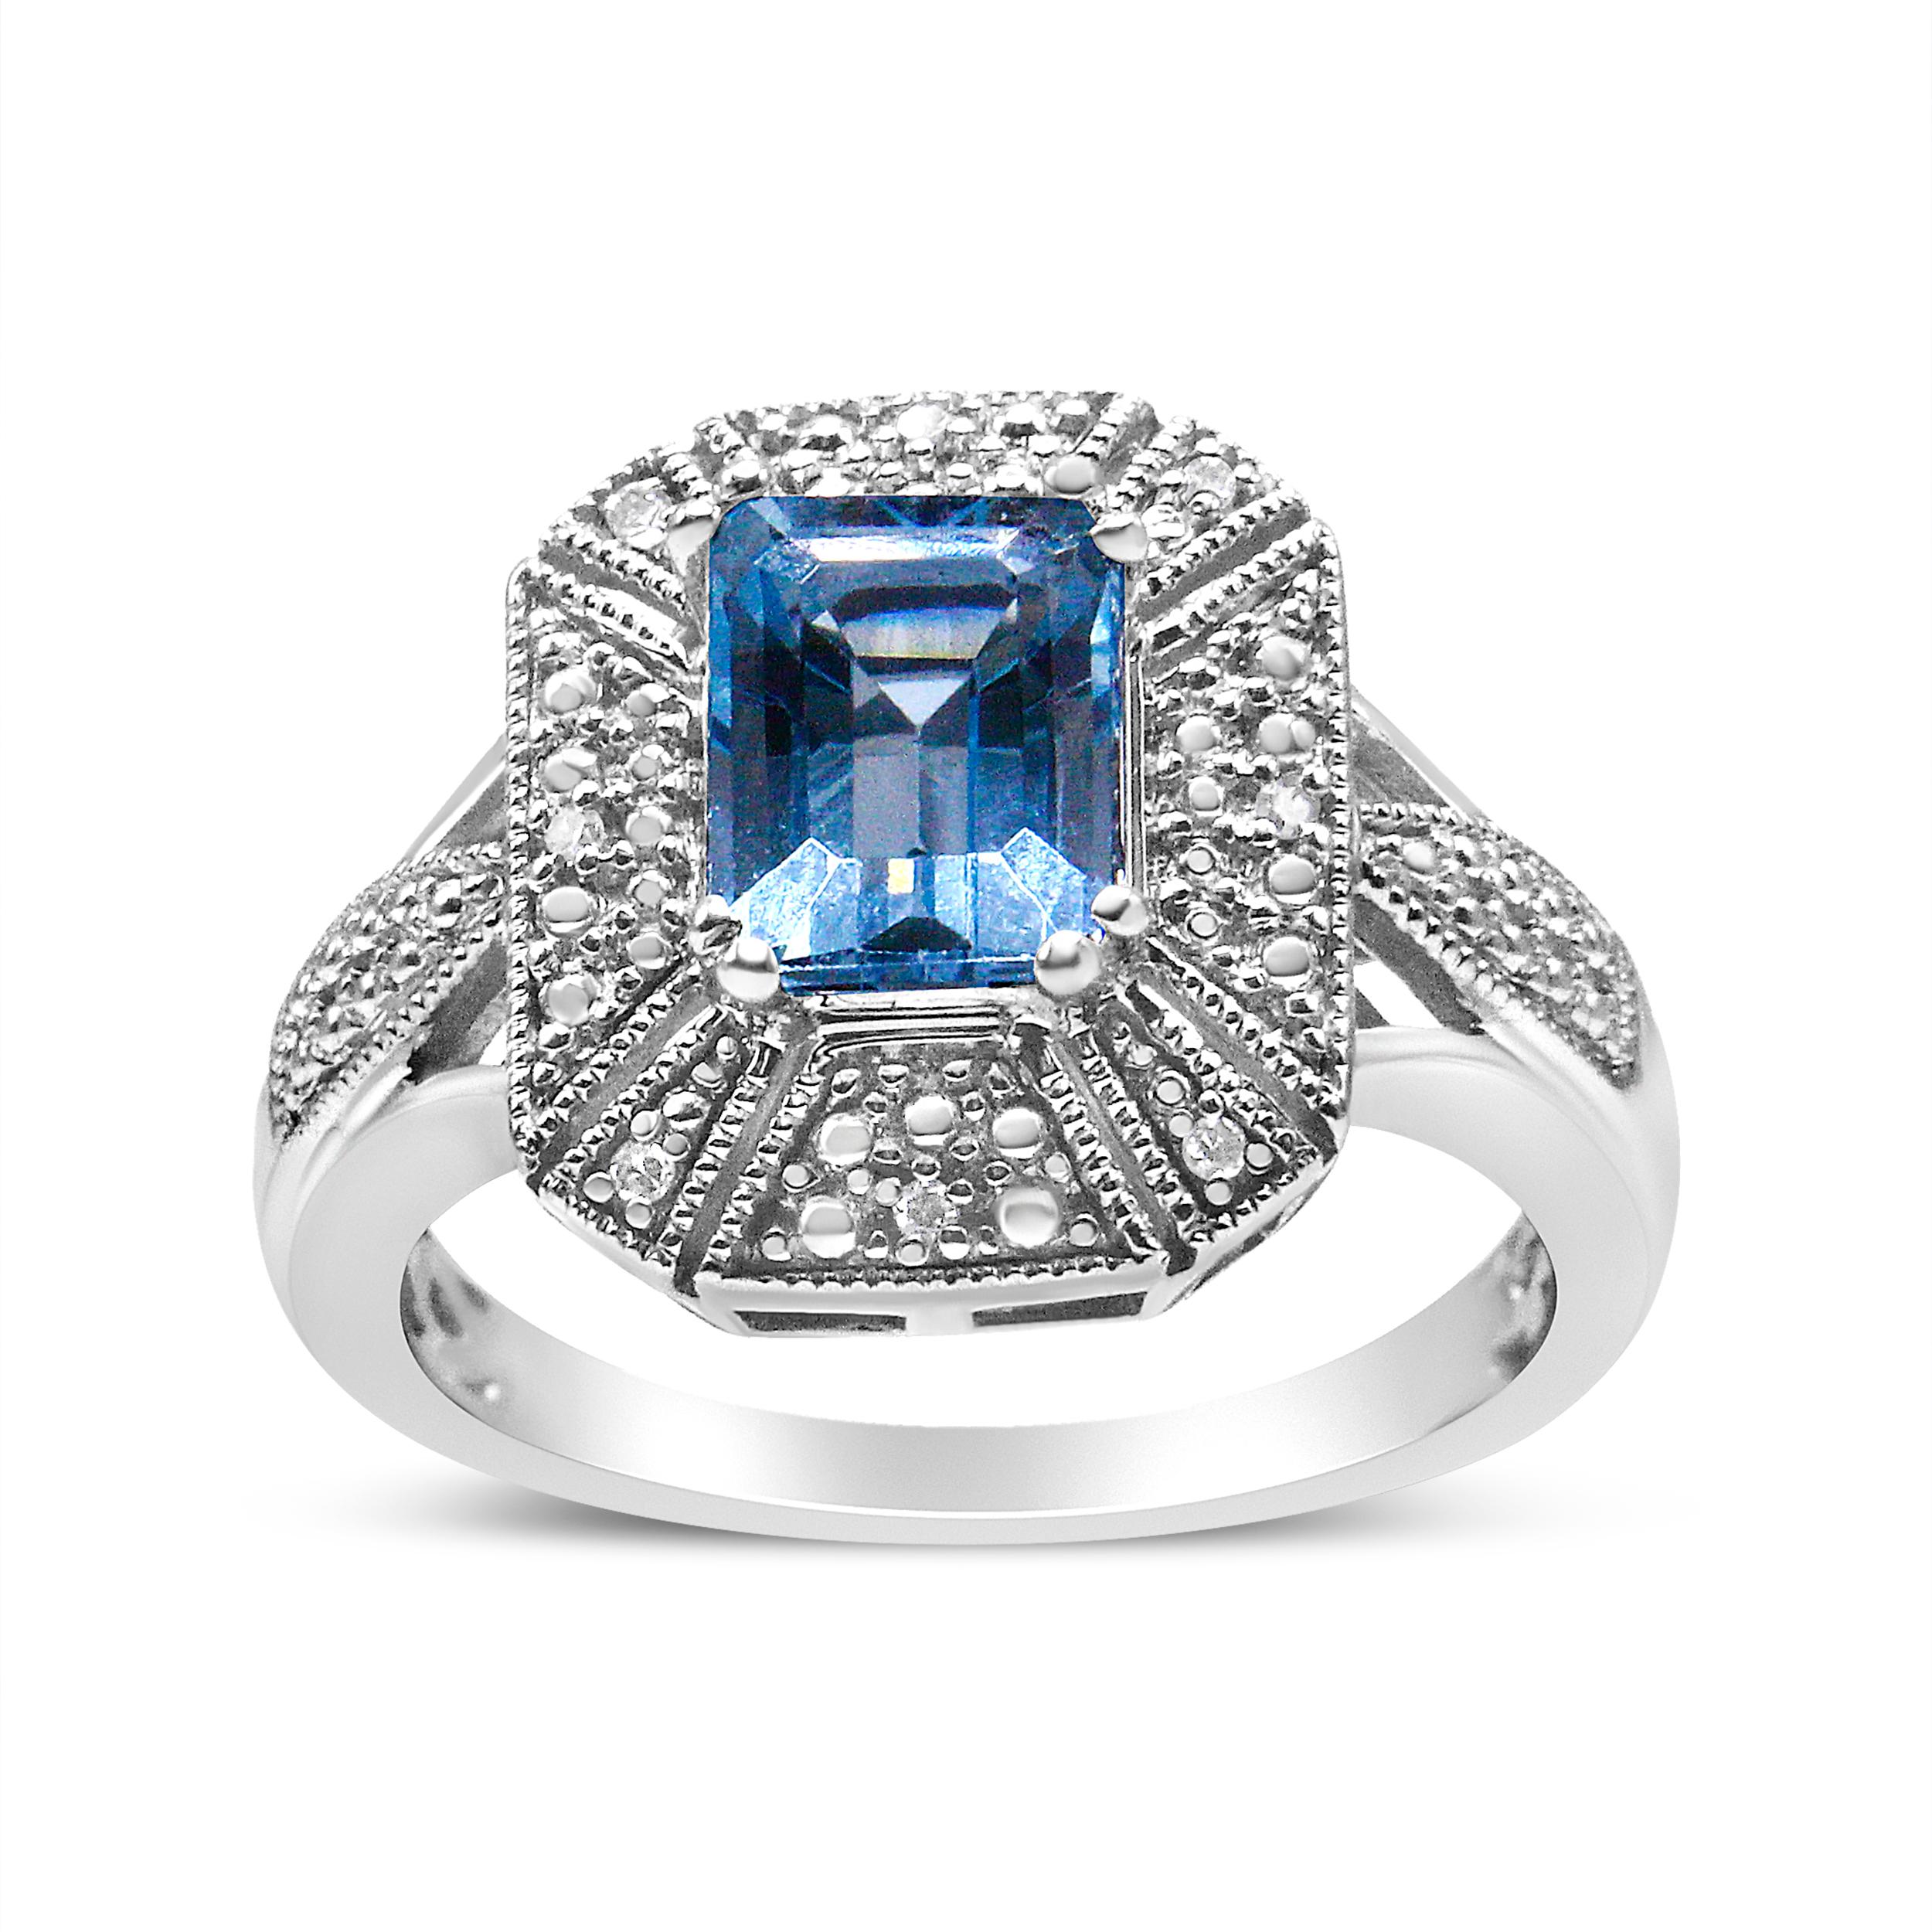 .925 Sterling Silver Diamond Accent and 8X6 mm Emerald-Shape Blue Topaz Ring 3